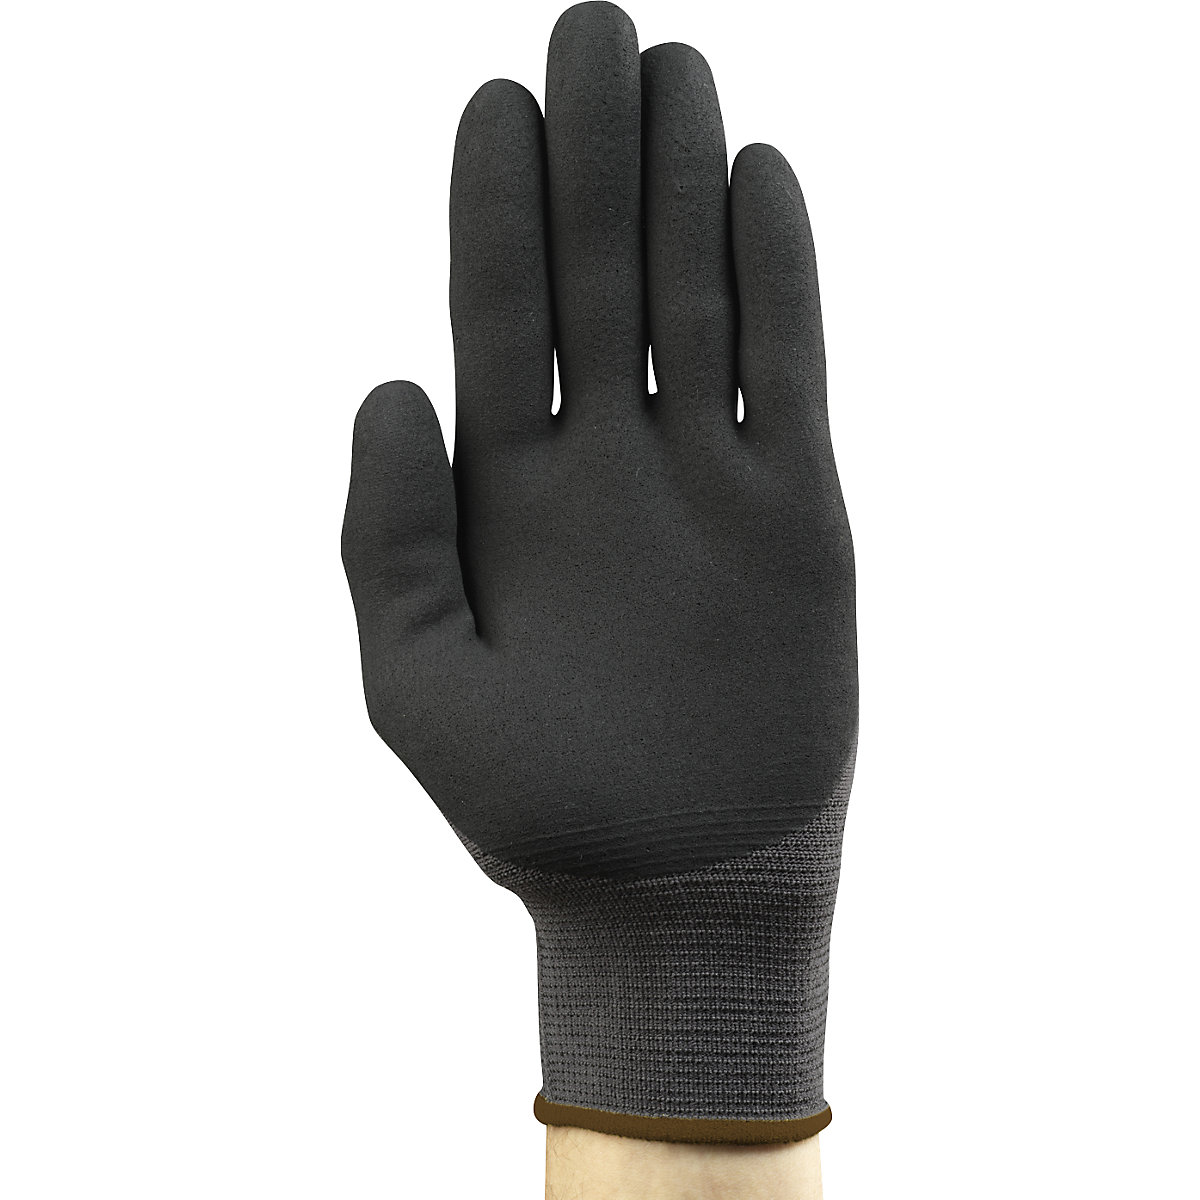 Blue Black Mechanics Glove for Multi-purpose Pack of 12 Ansell HyFlex 11-618 Work Gloves in Nylon Mens Workwear Durable Size 6 Extra-Thin